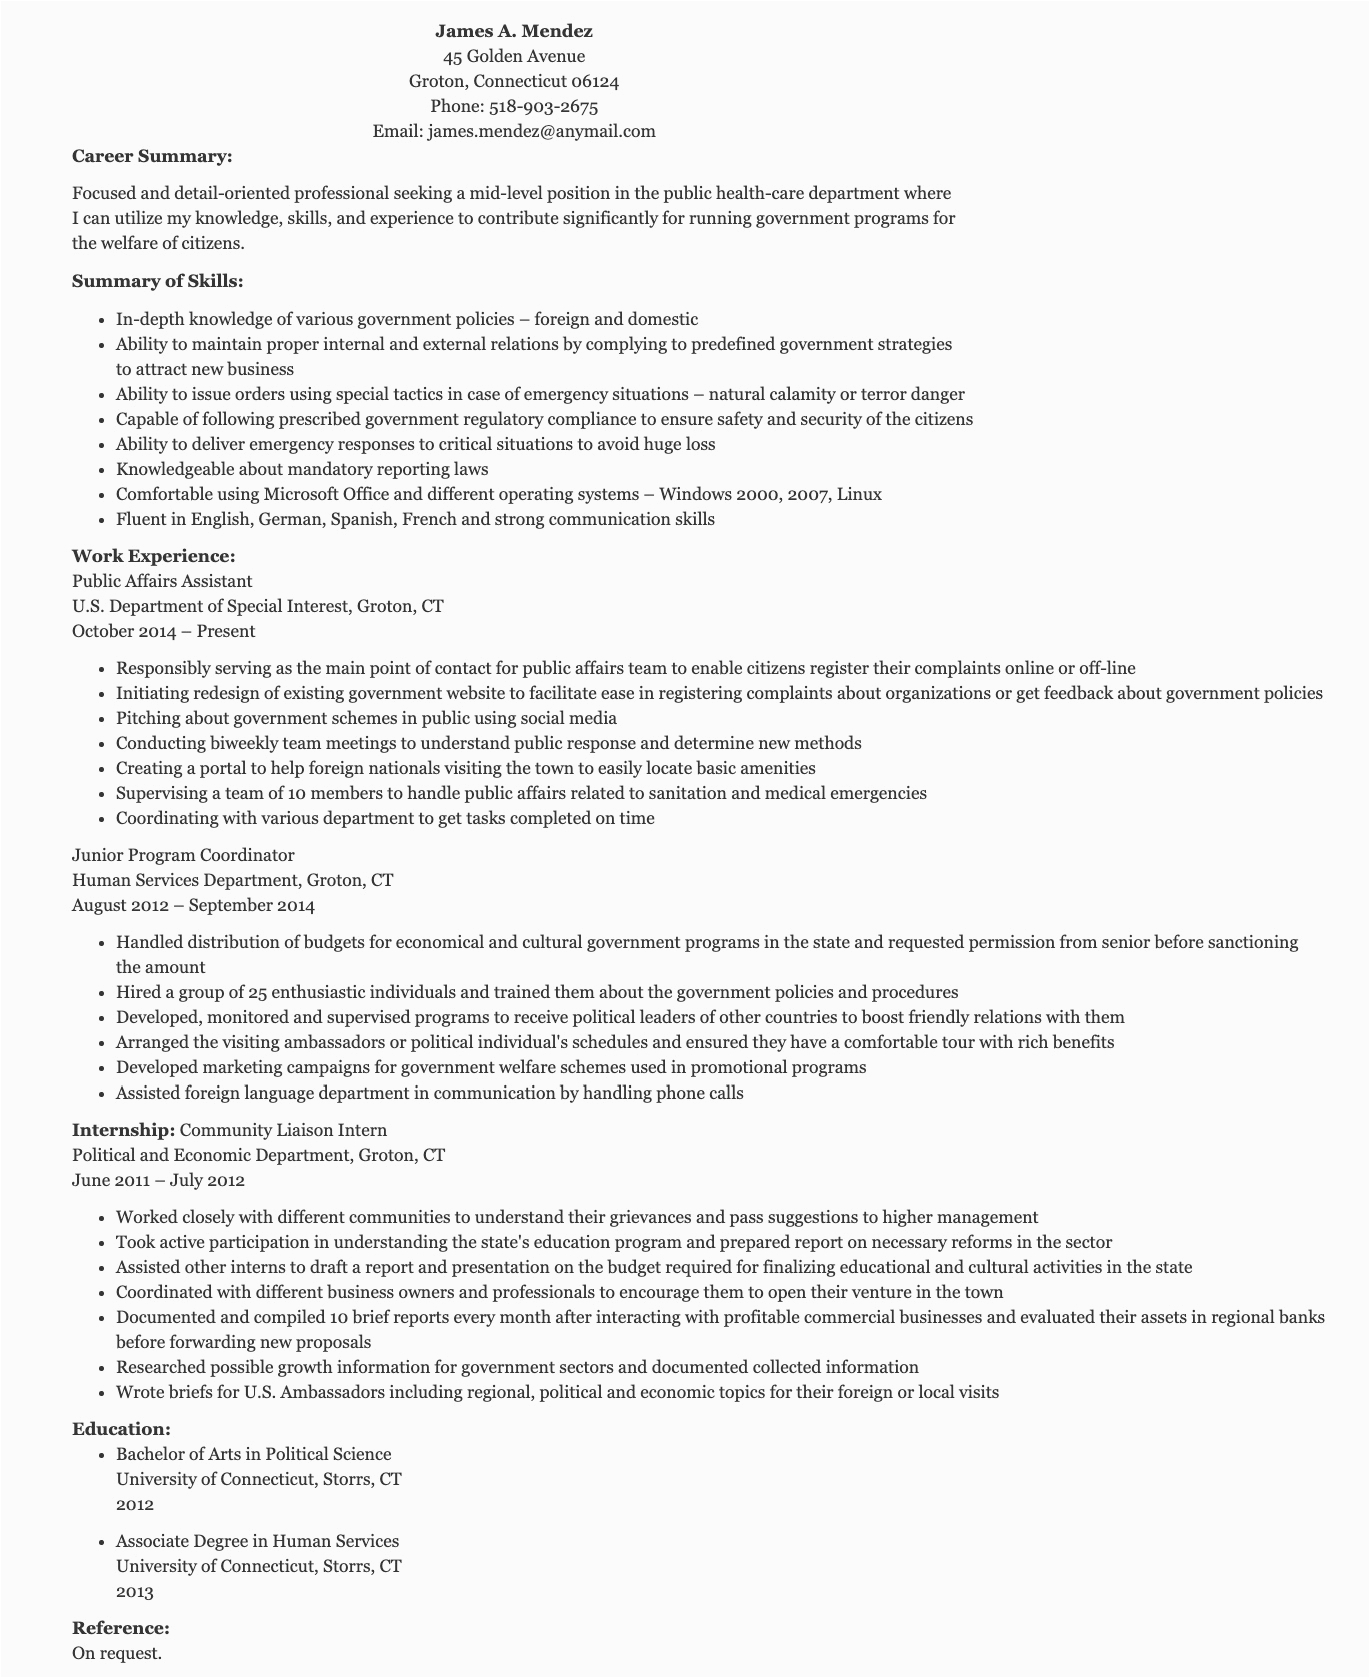 Sample Resume for Government Employee Philippines Resume Samples for Government Job Application In the